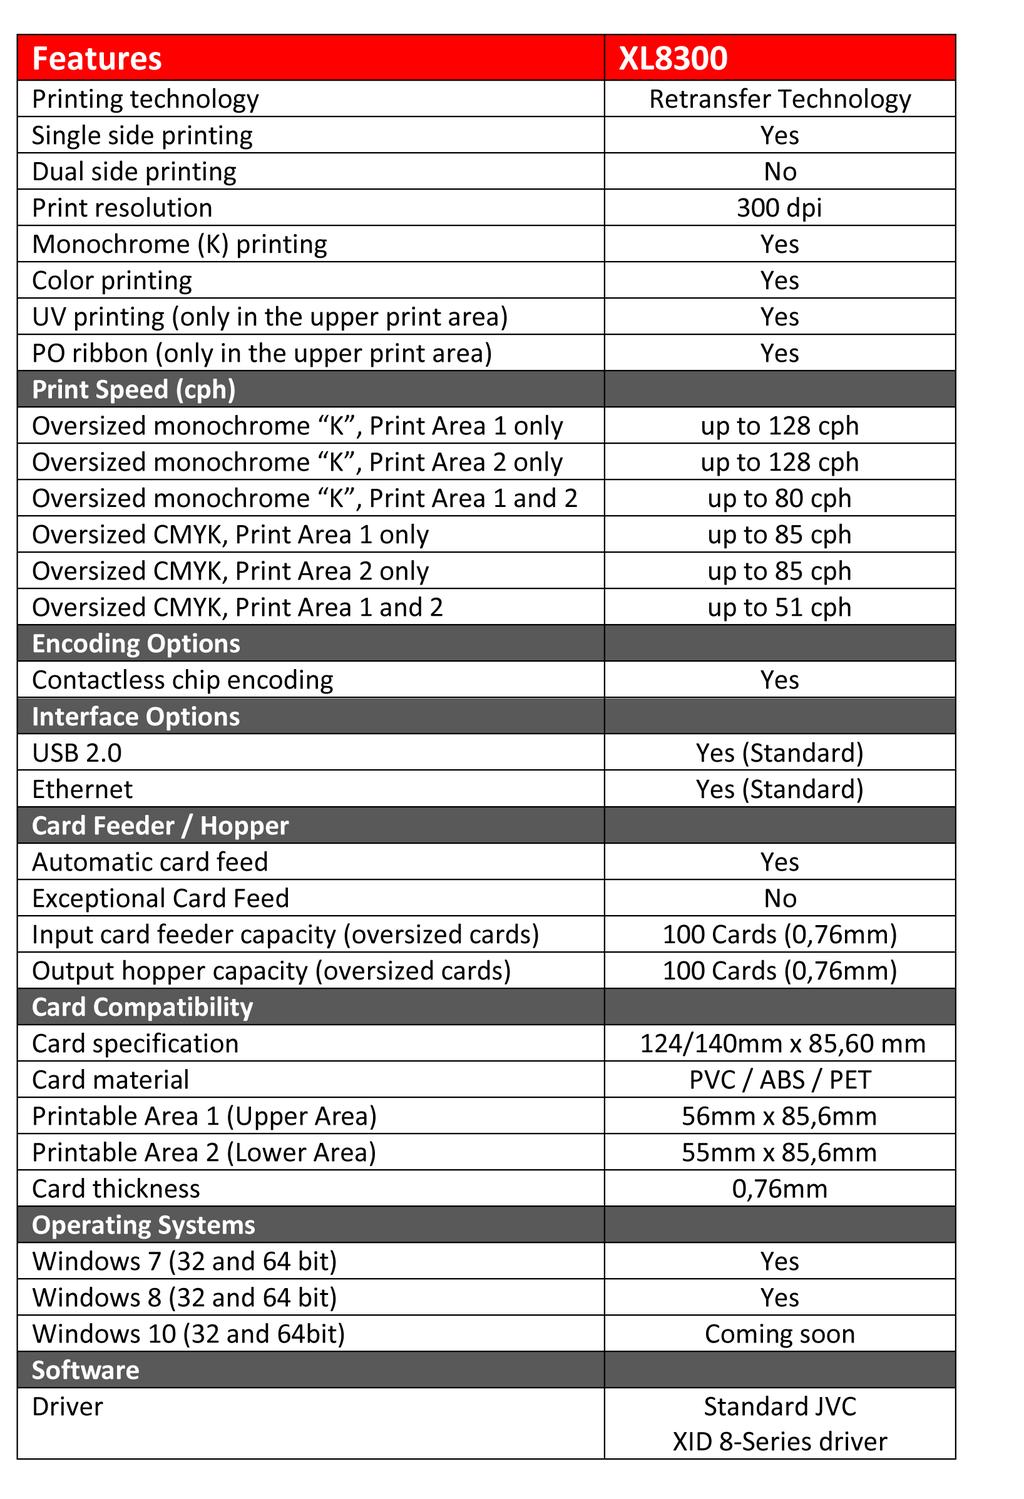 XL8300 Printer Specifications